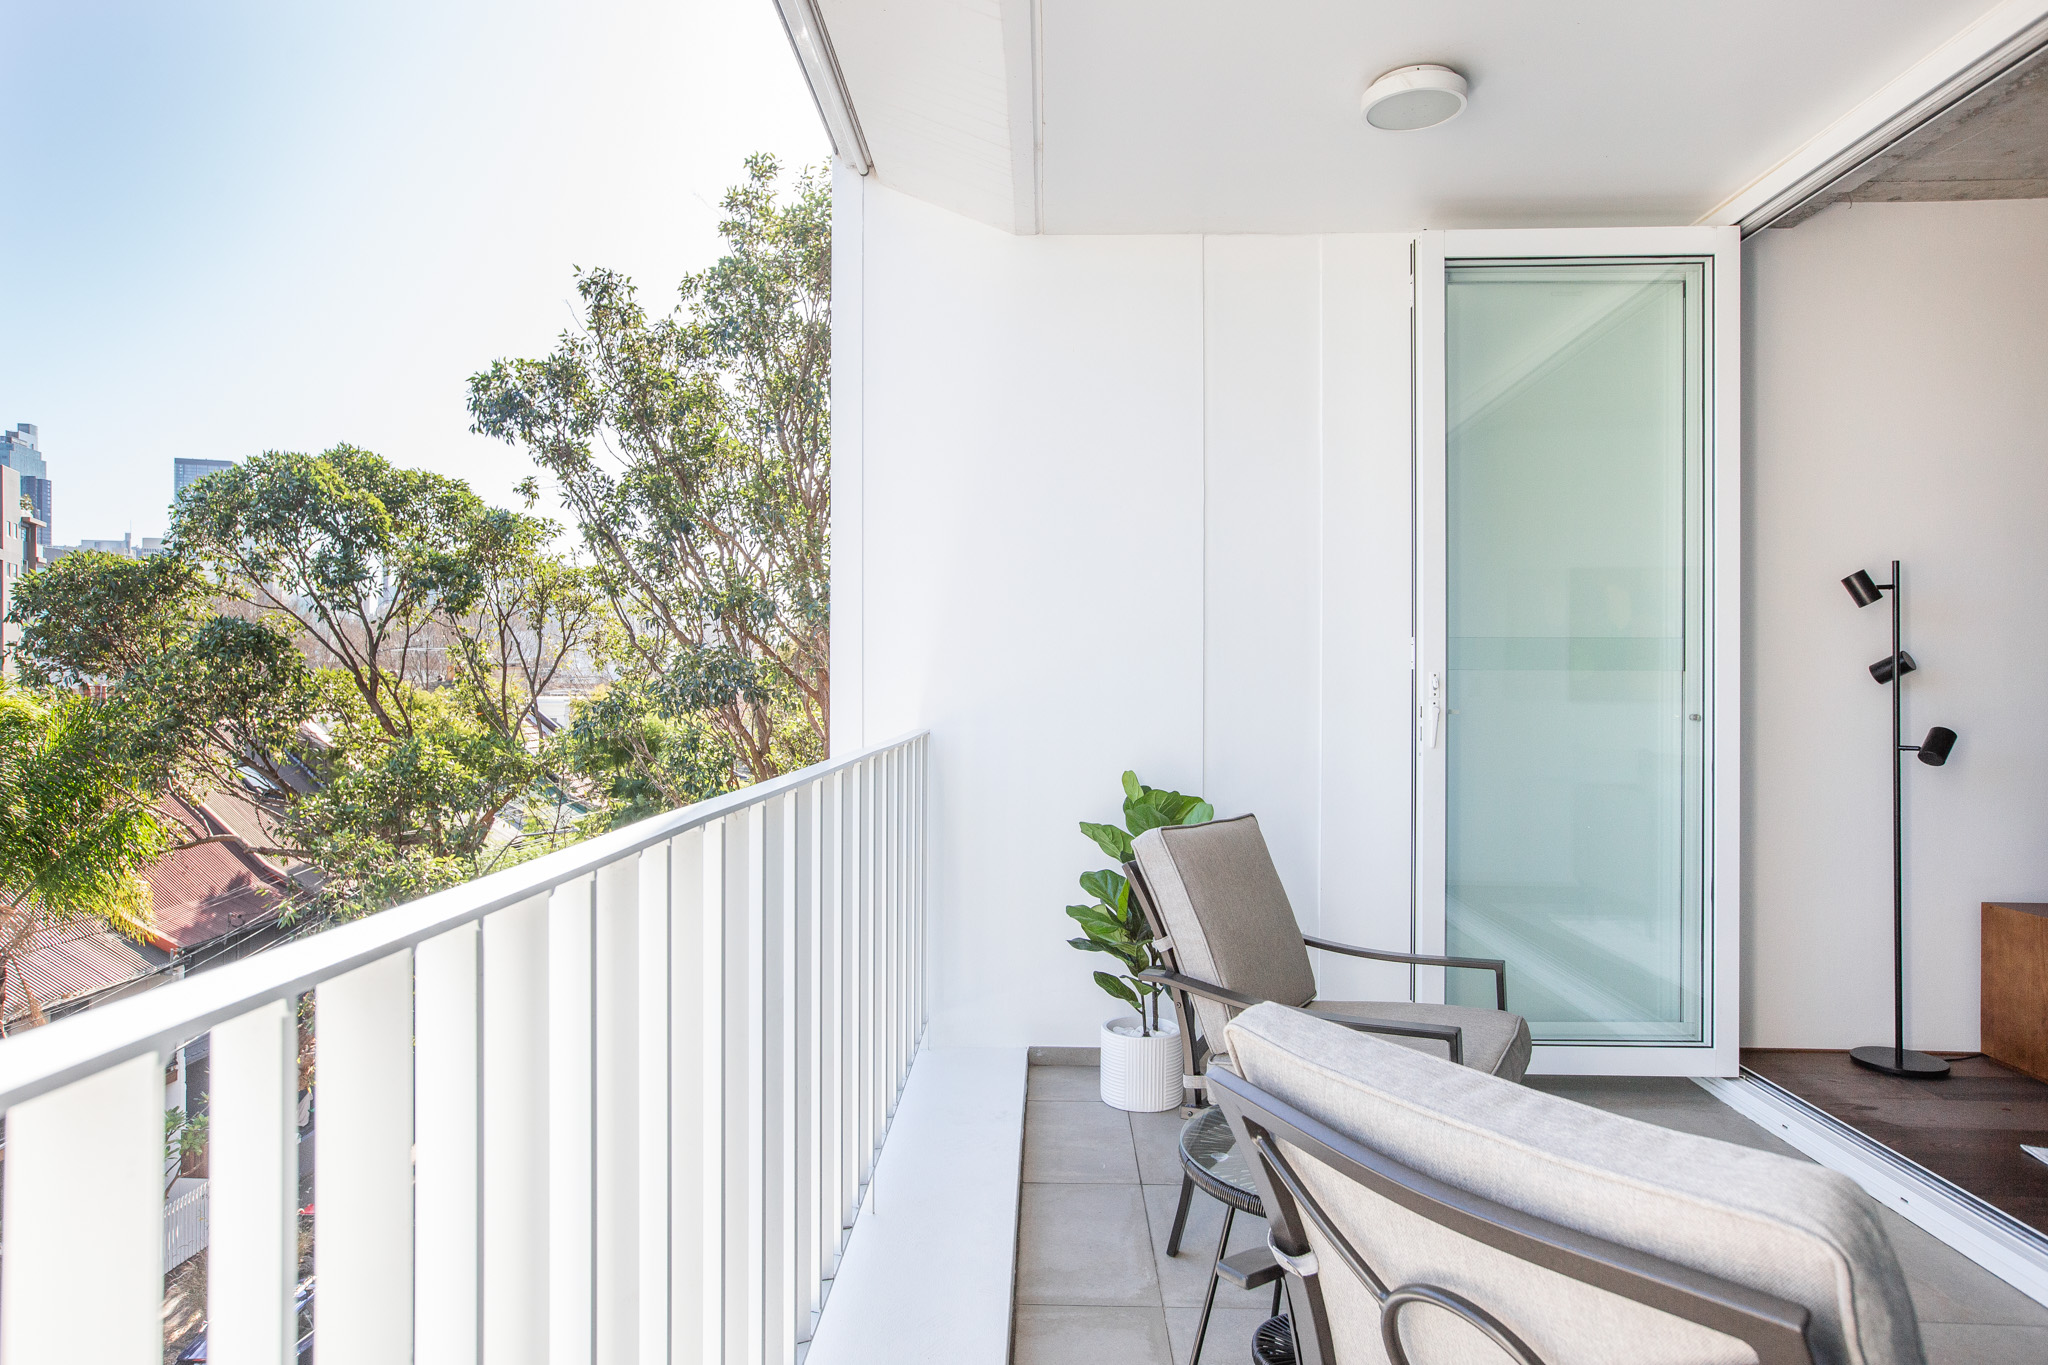 Balcony - One Bedroom Apartment at - The Chromatic Apartments - Urban Rest - Sydney